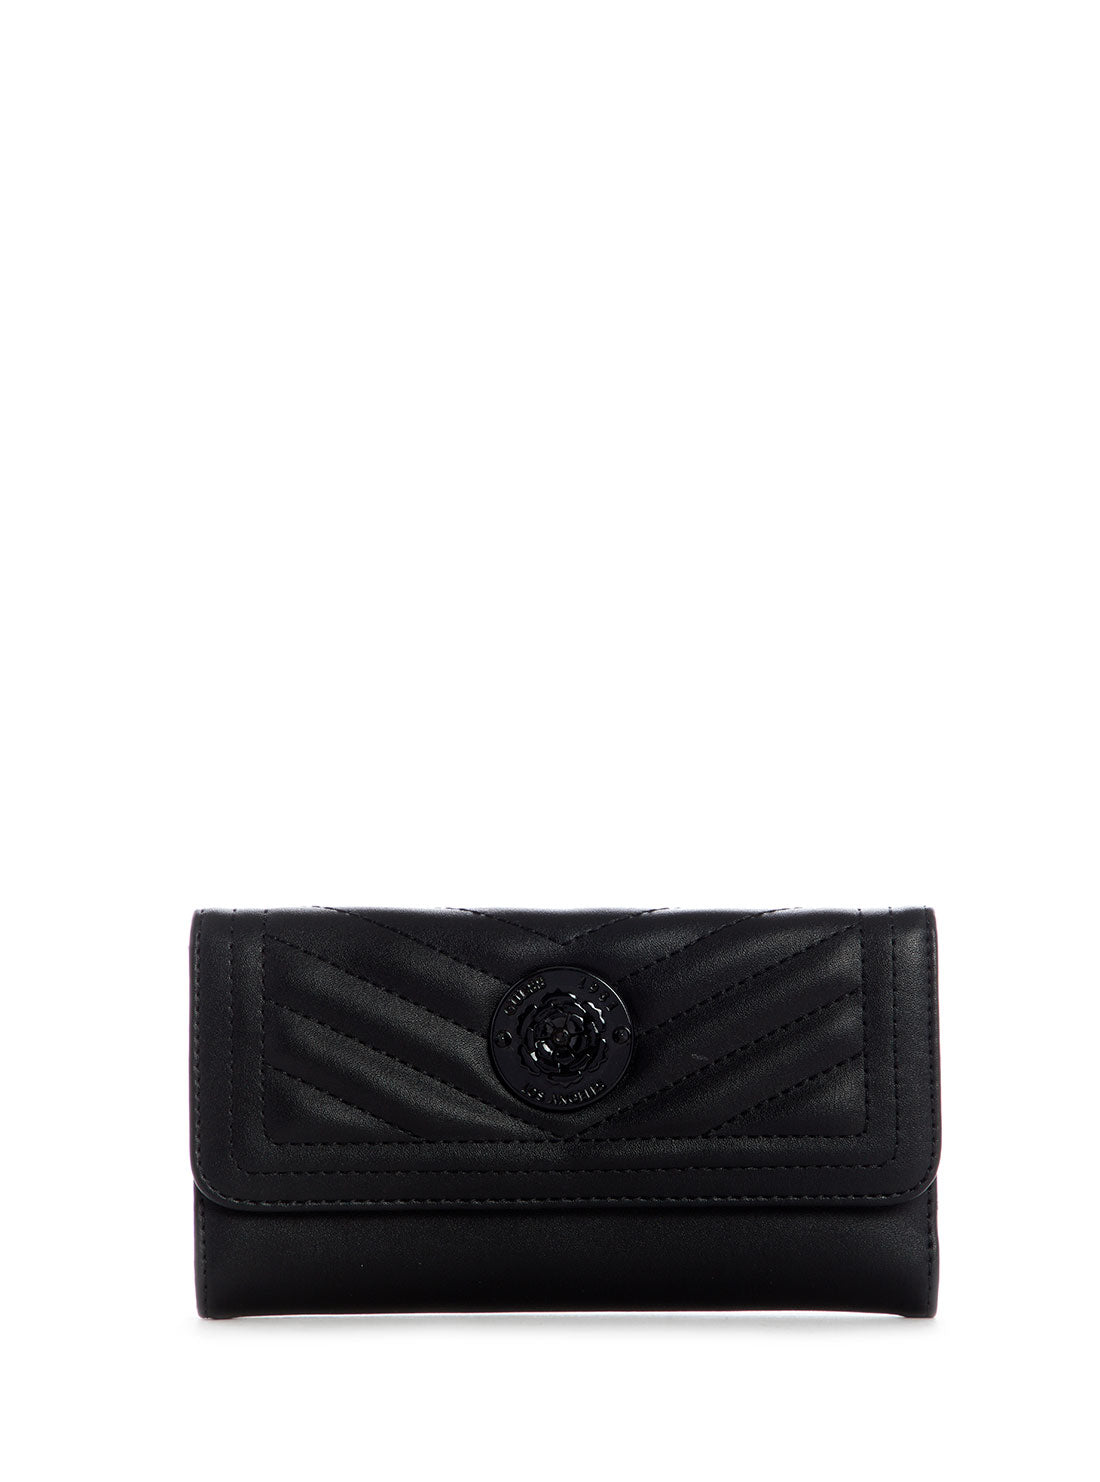 GUESS Black Noelle Multi Clutch front view